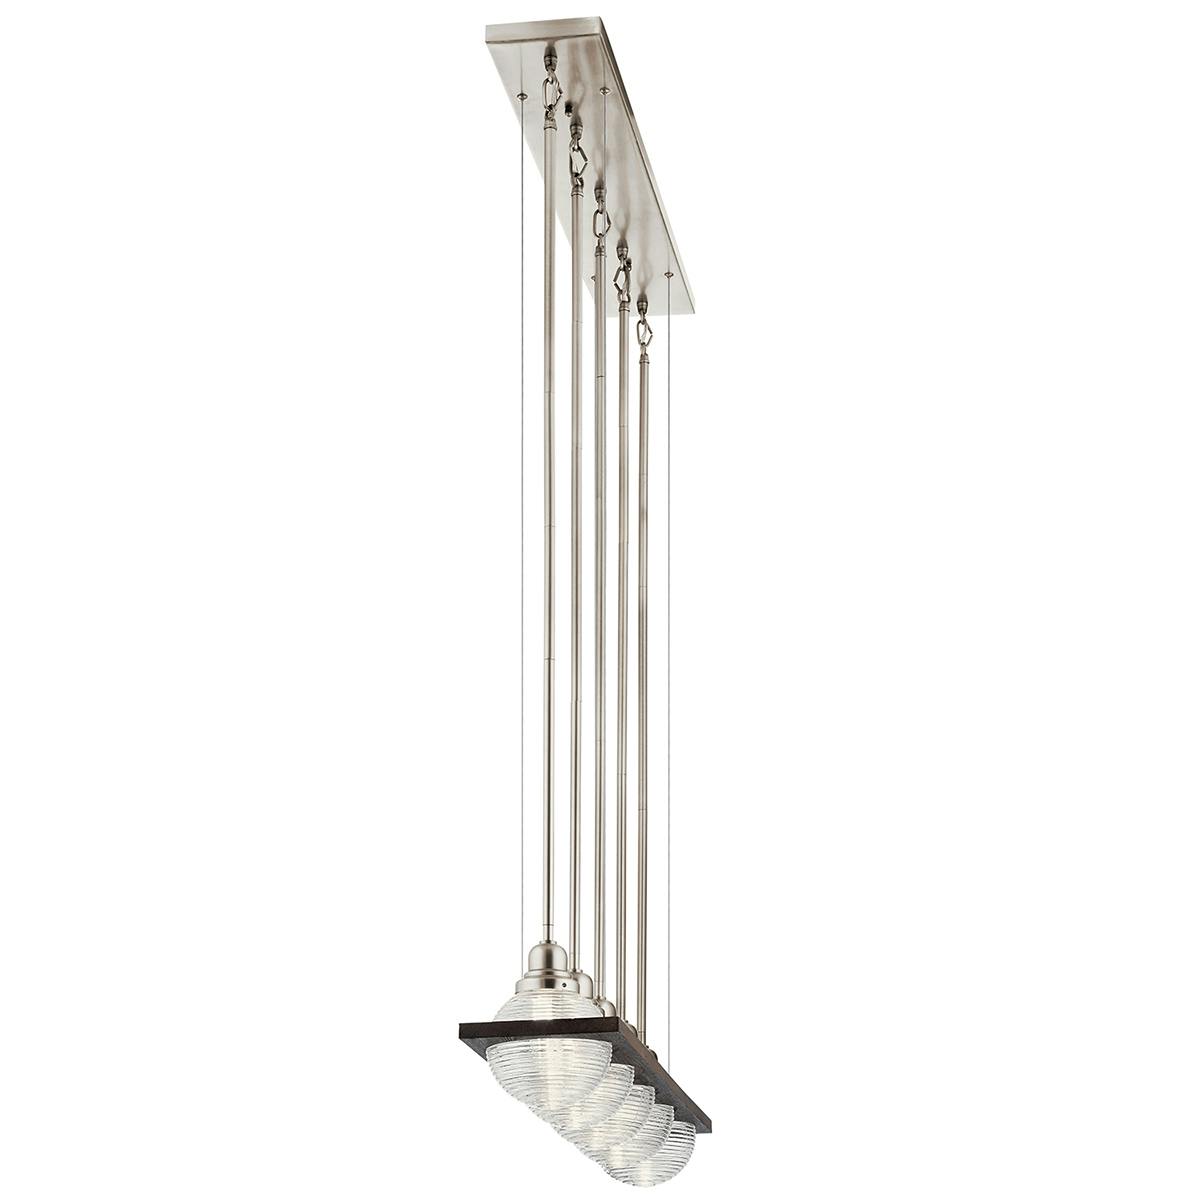 Profile view of the Potomi 5 Light Linear Chandelier Pewter on a white background